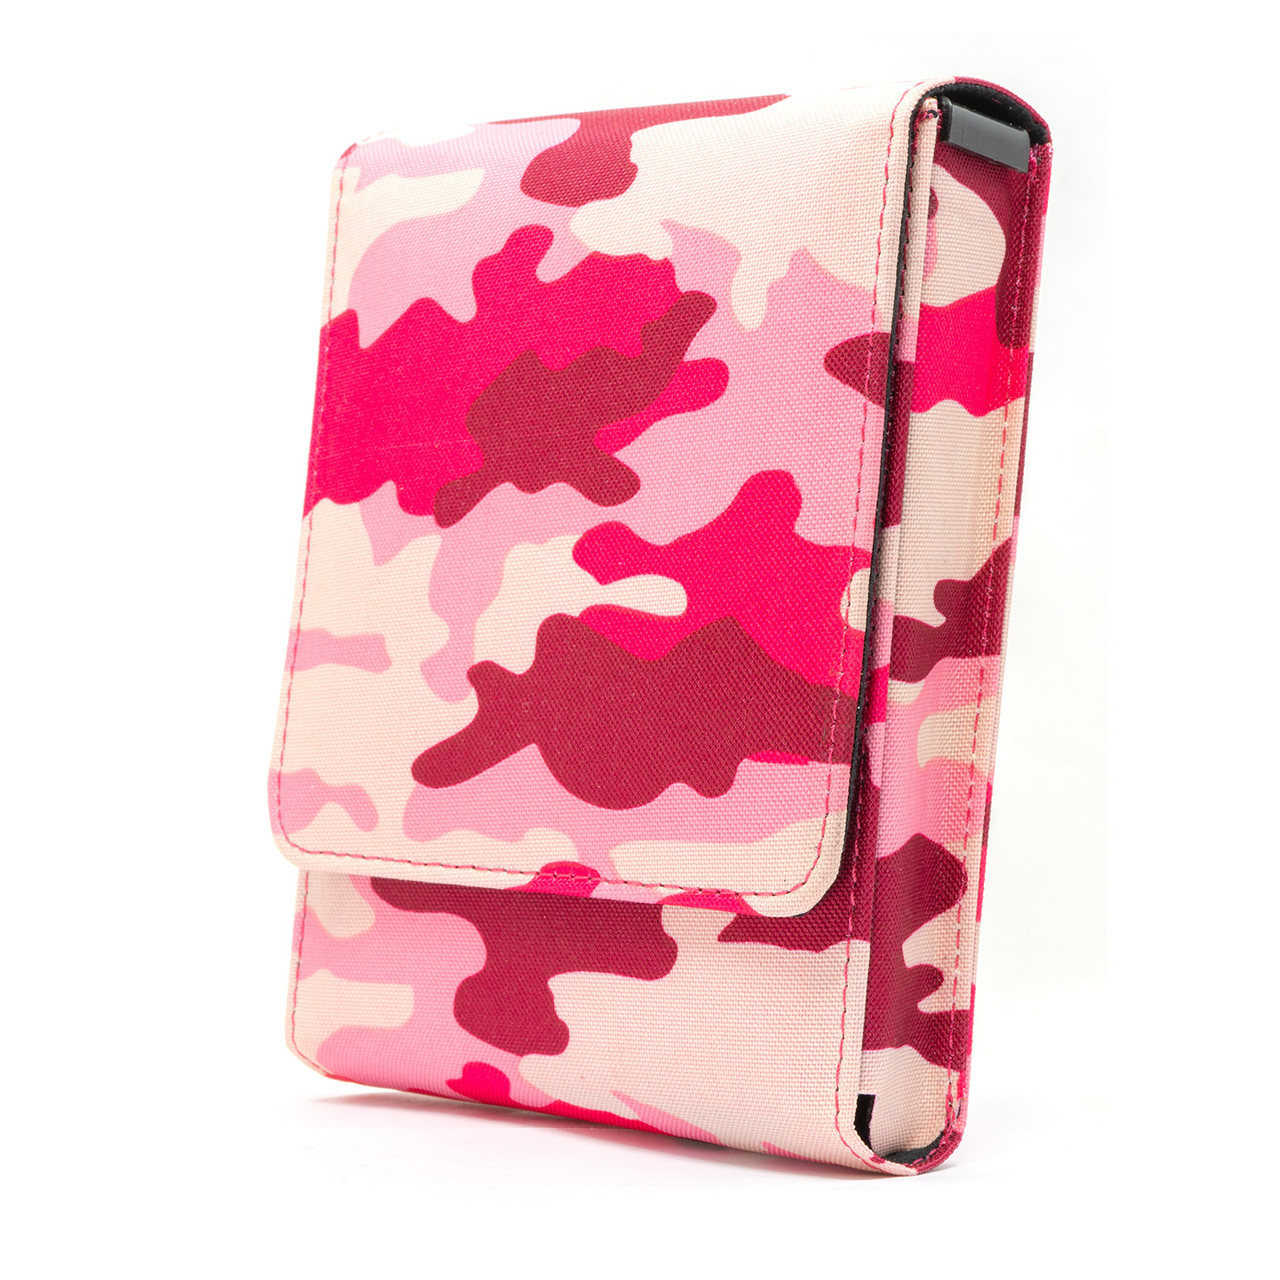 Sig Sauer P250 Sub Compact Pink Camouflage Series Holster